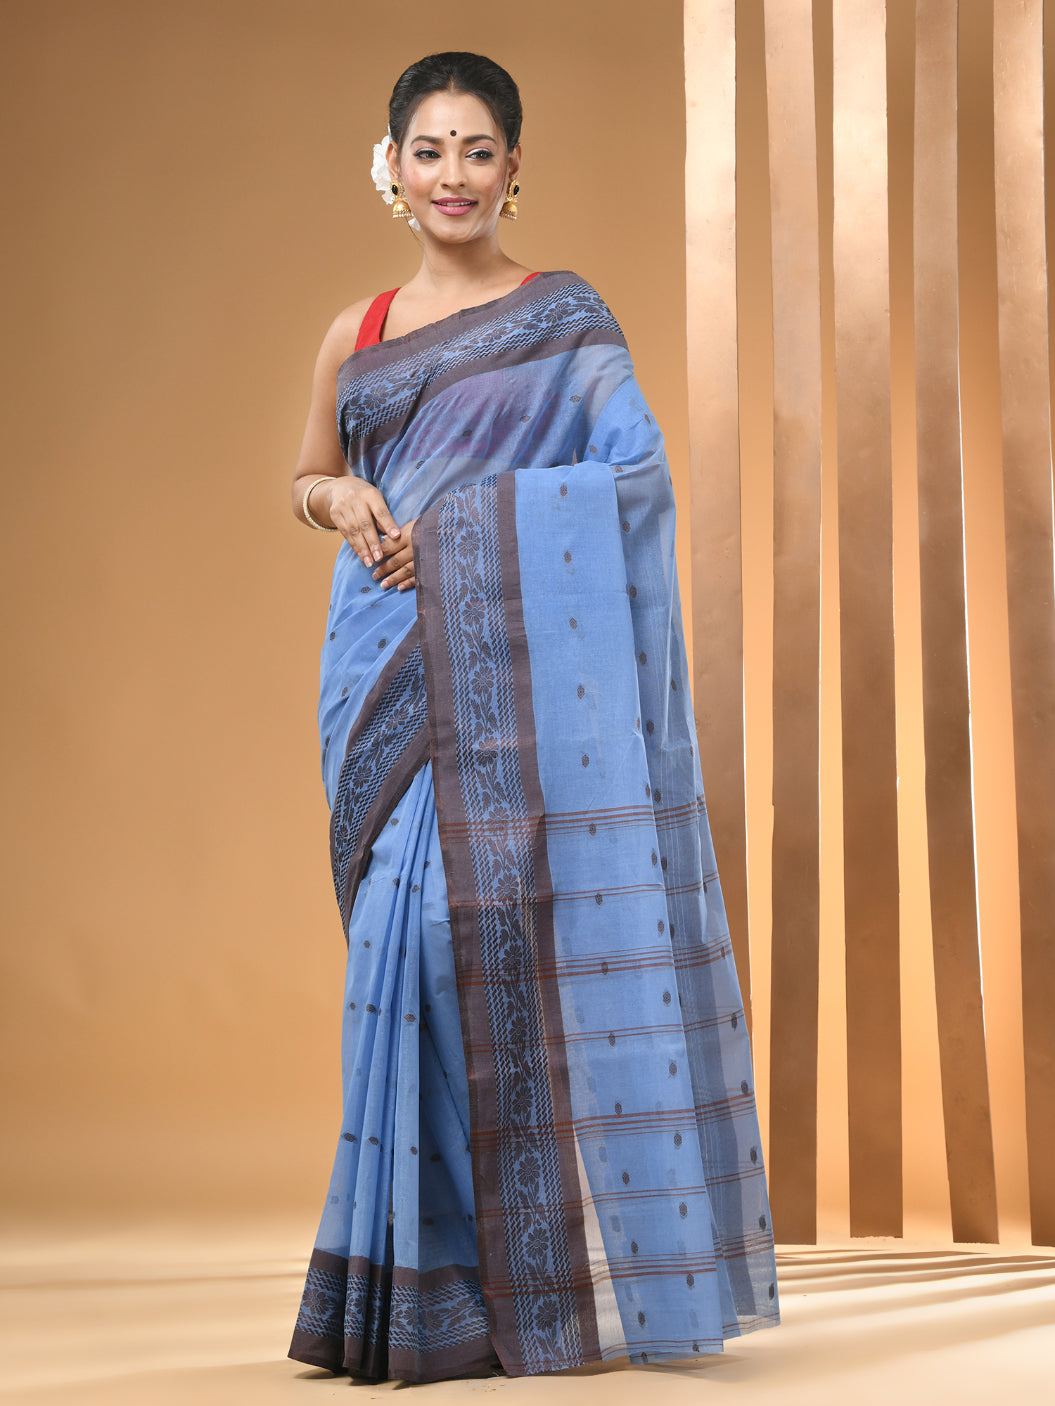 Neon Blue Pure Cotton Tant Saree With Woven Designs